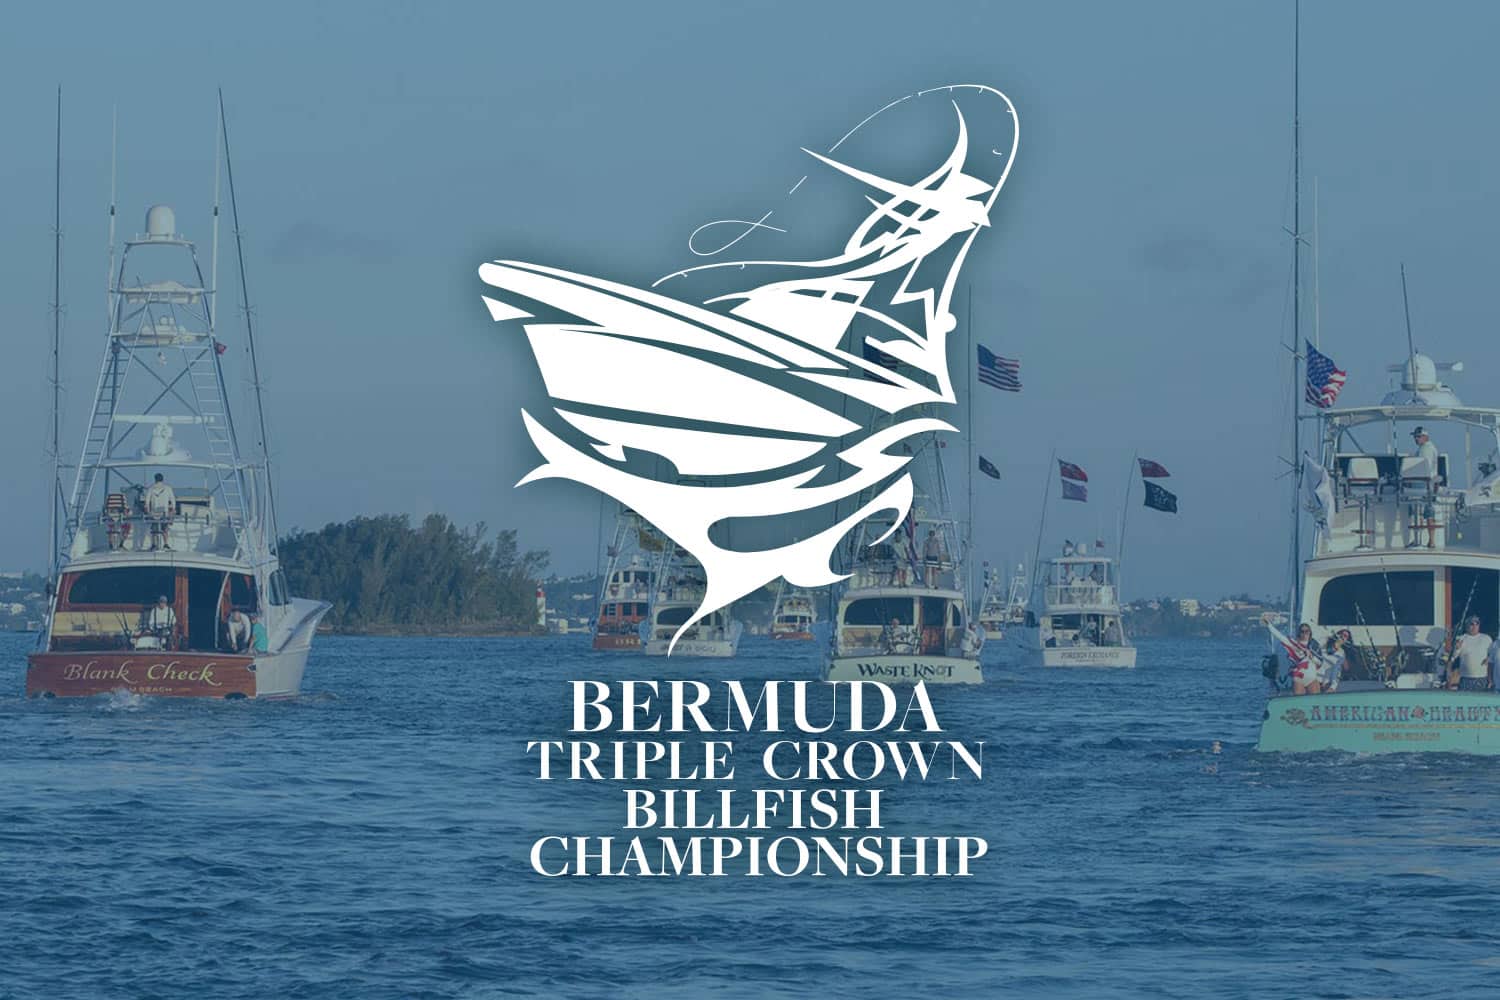 Bermuda Triple Crown Billfish Championship logo in white overlaid a blue-filter image of sport-fishing boats on the water.